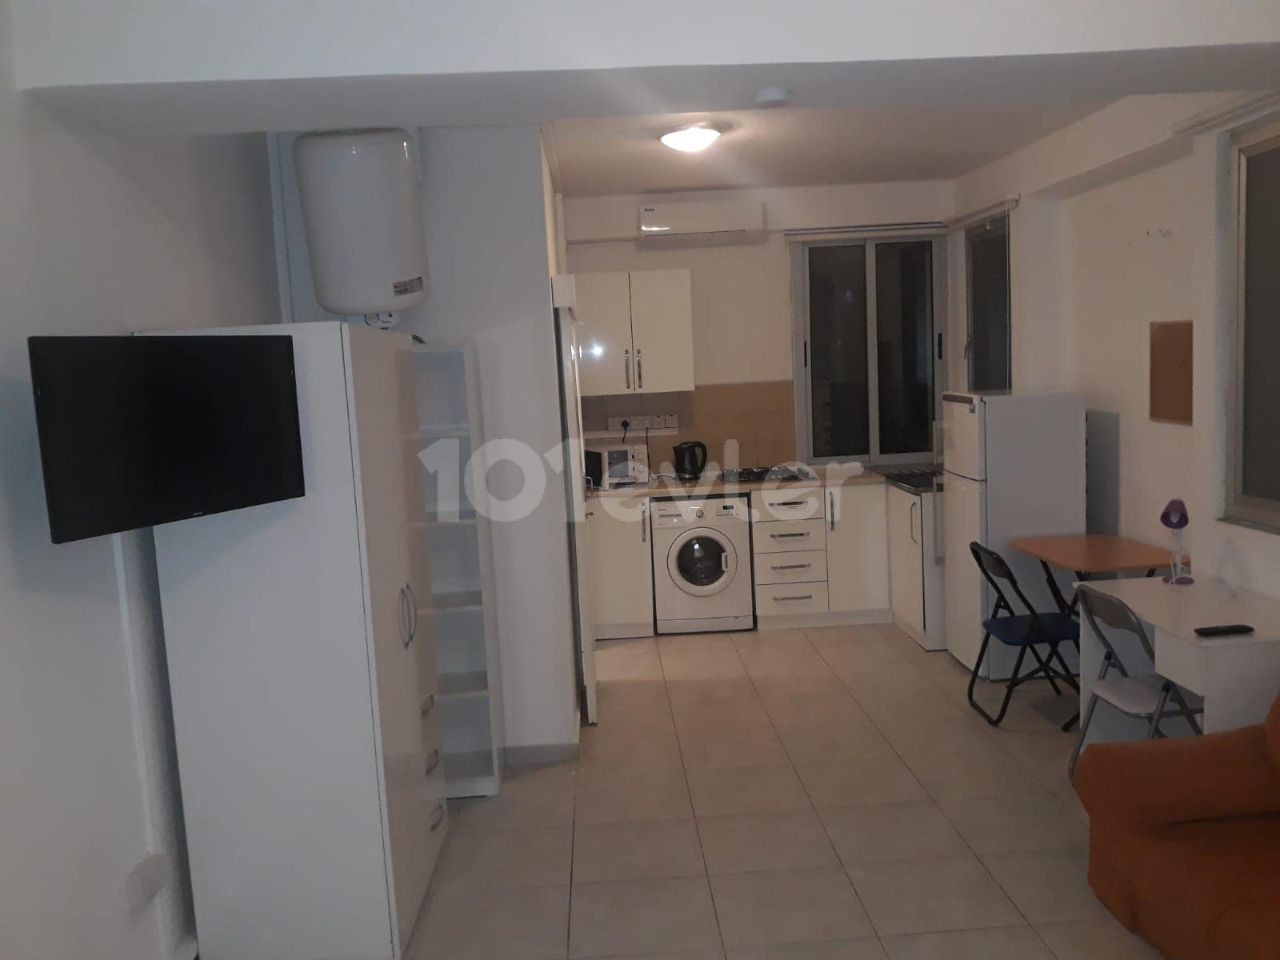 AVAILABLE NOW - 1+1 Studio Fully Furnished Apartment FOR RENT !!! -MITRELI DISTRICT Markets, Stops are 2 Minutes away. 1+1 STUDIO Fully Furnished Apartment for Rent at a Distance ** 